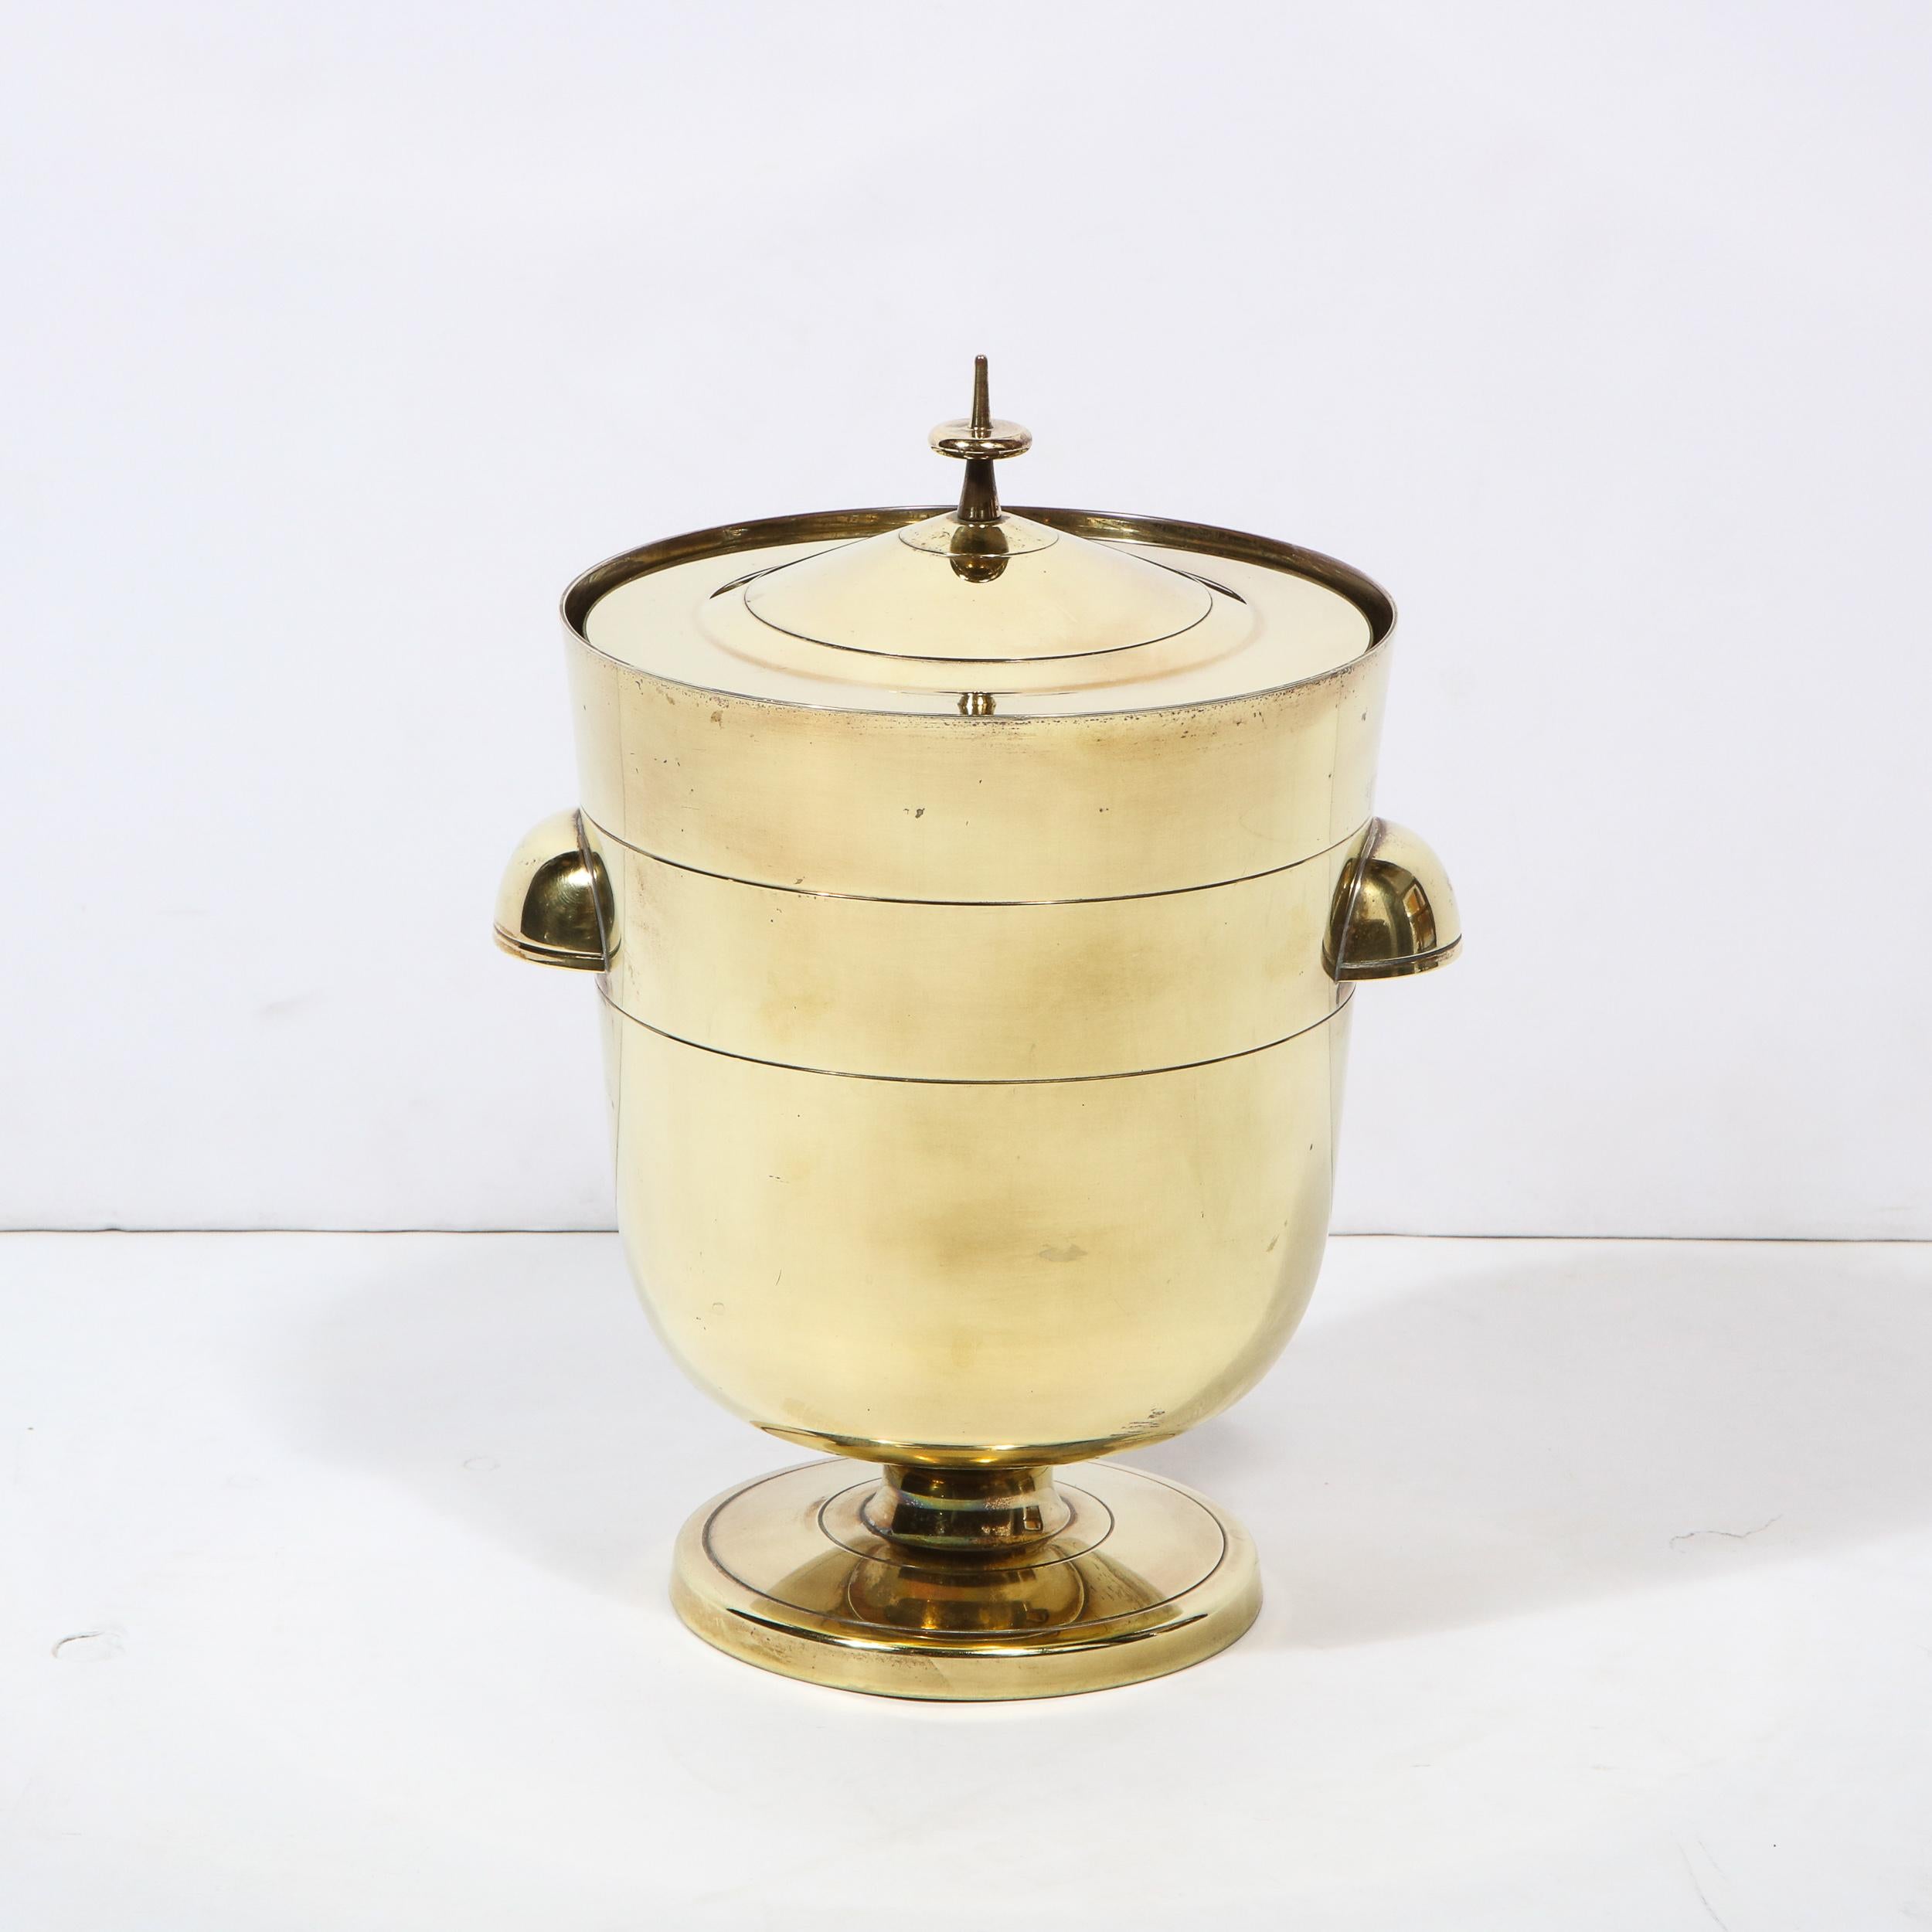 This elegant Mid Century Modern ice bucket/ wine cooler was designed by the legendary Tommi Parzinger for Dorlyn Silversmiths circa 1960. It offers a striated circular slightly convex base with a cylindrical neck and a bullet form cylindrical body